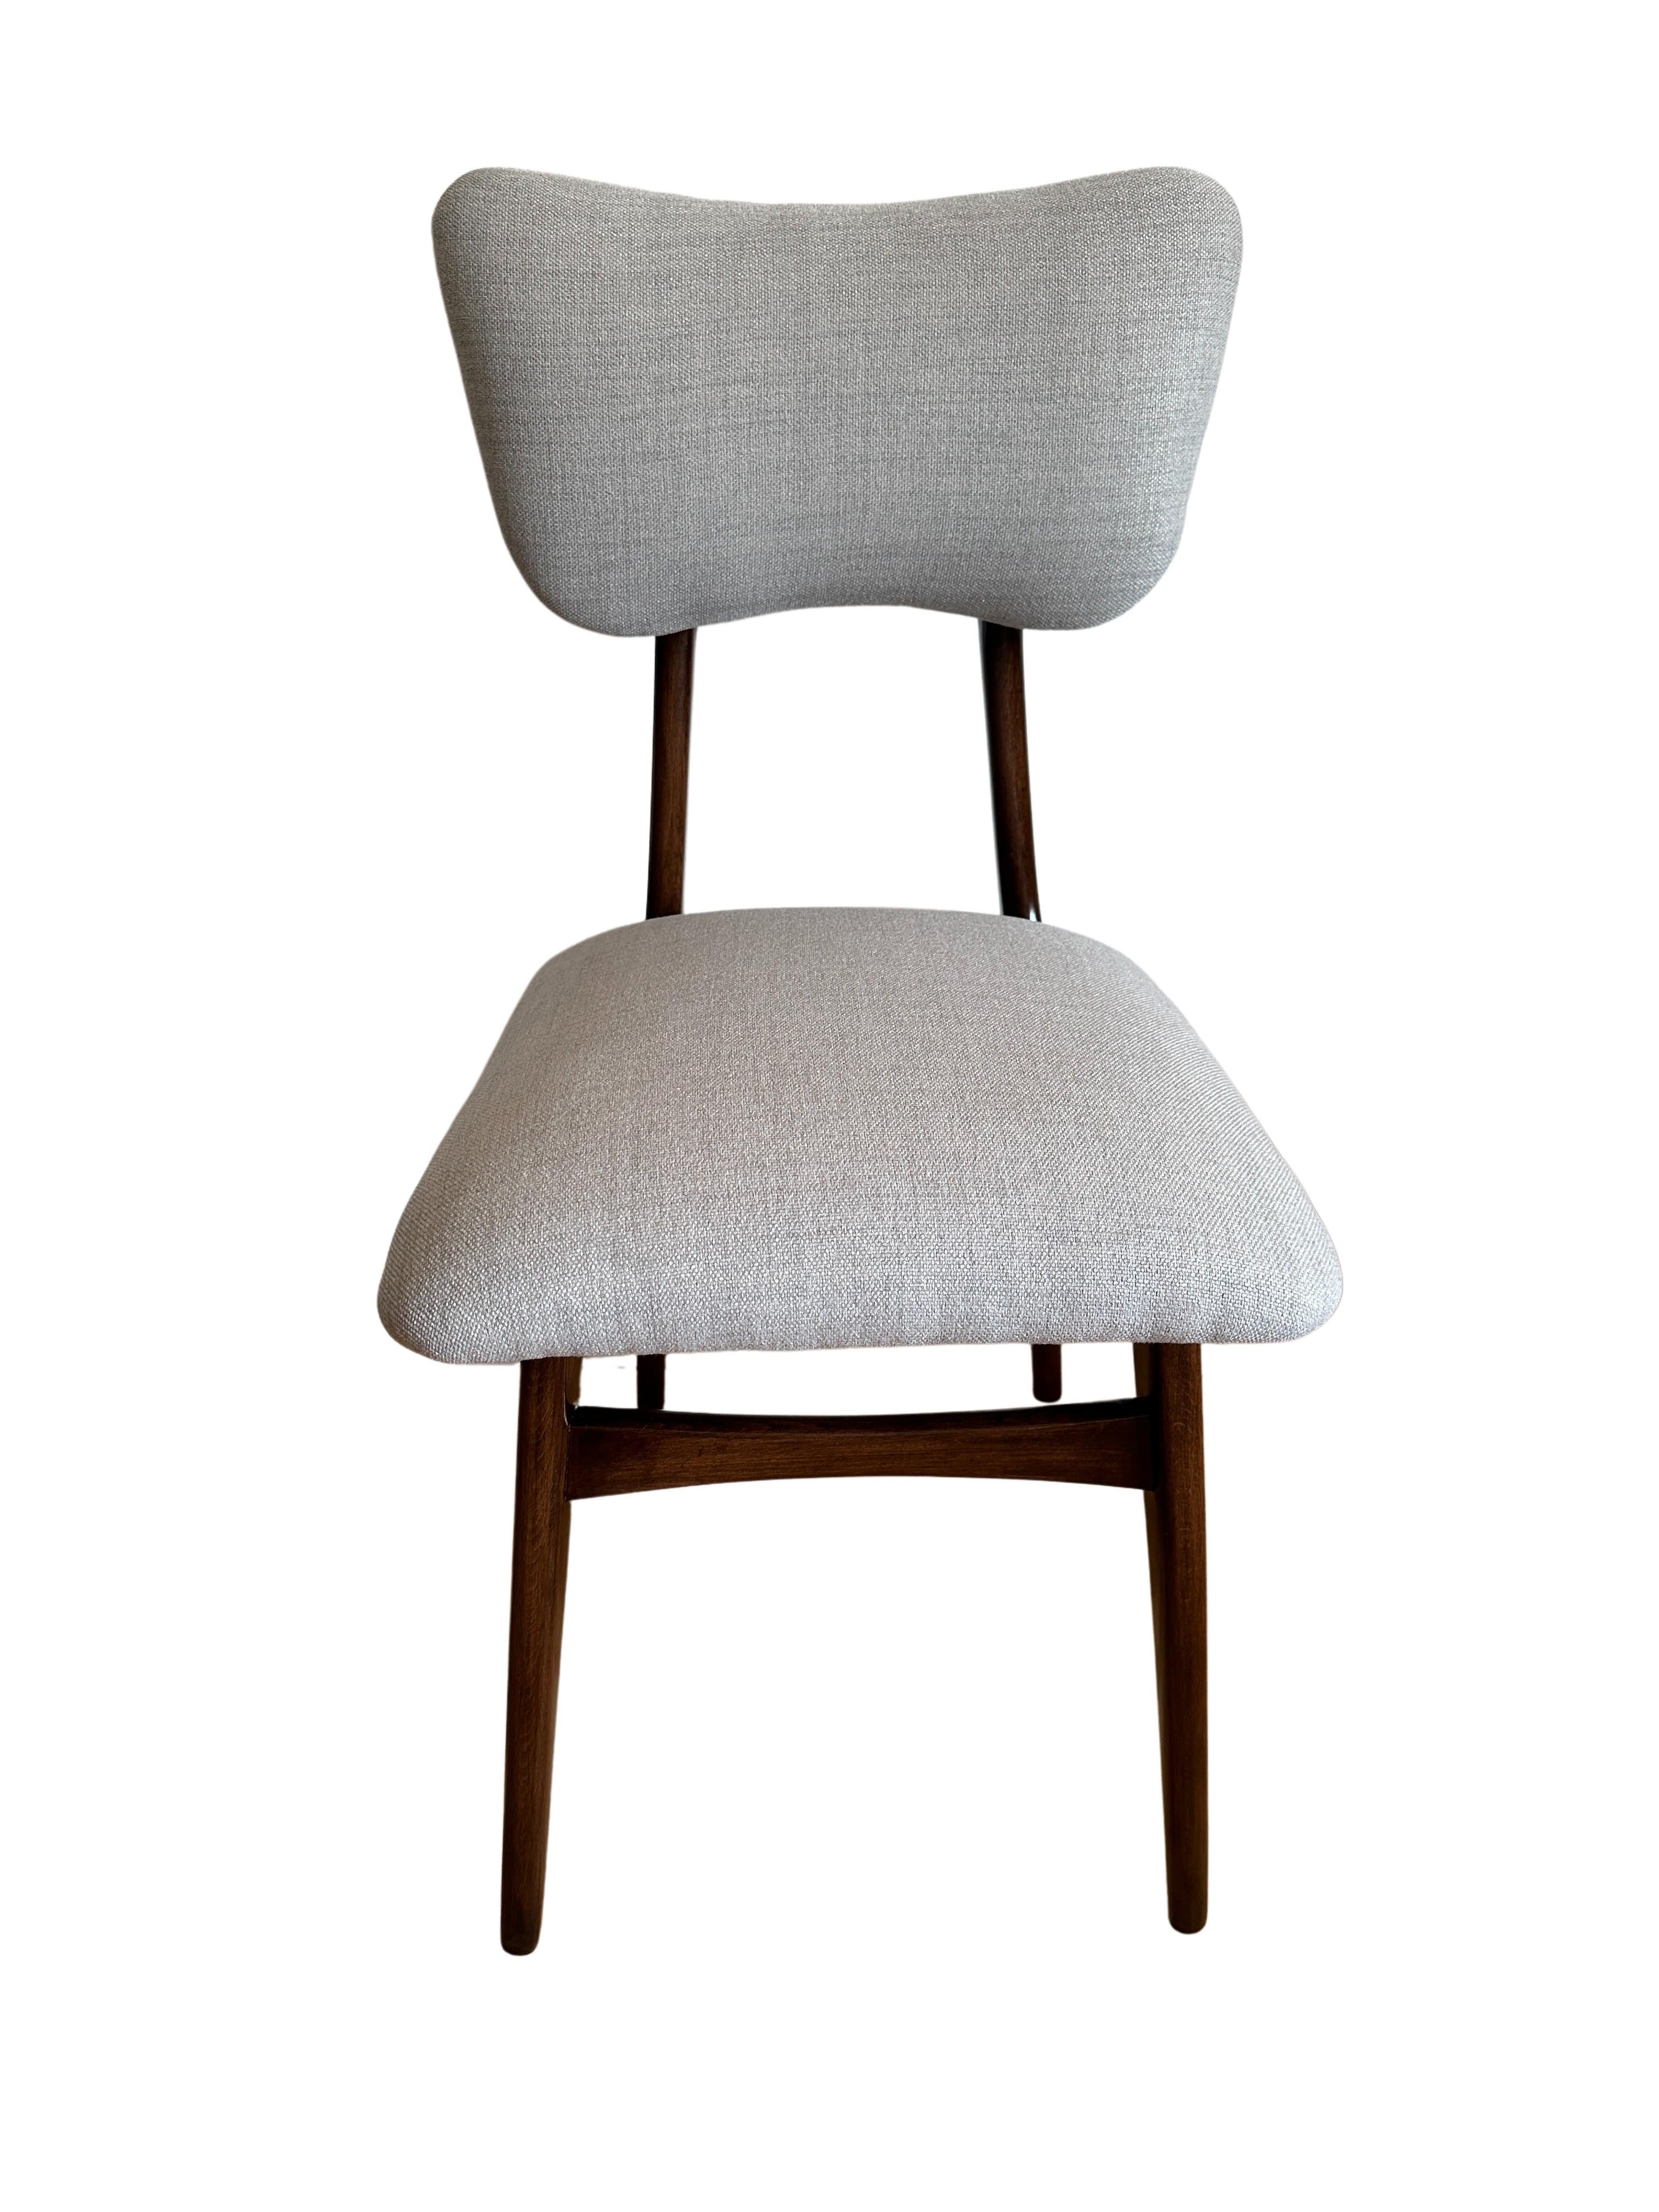 Set of 4 Midcentury Grey Dining Chairs, Europe, 1960s For Sale 6